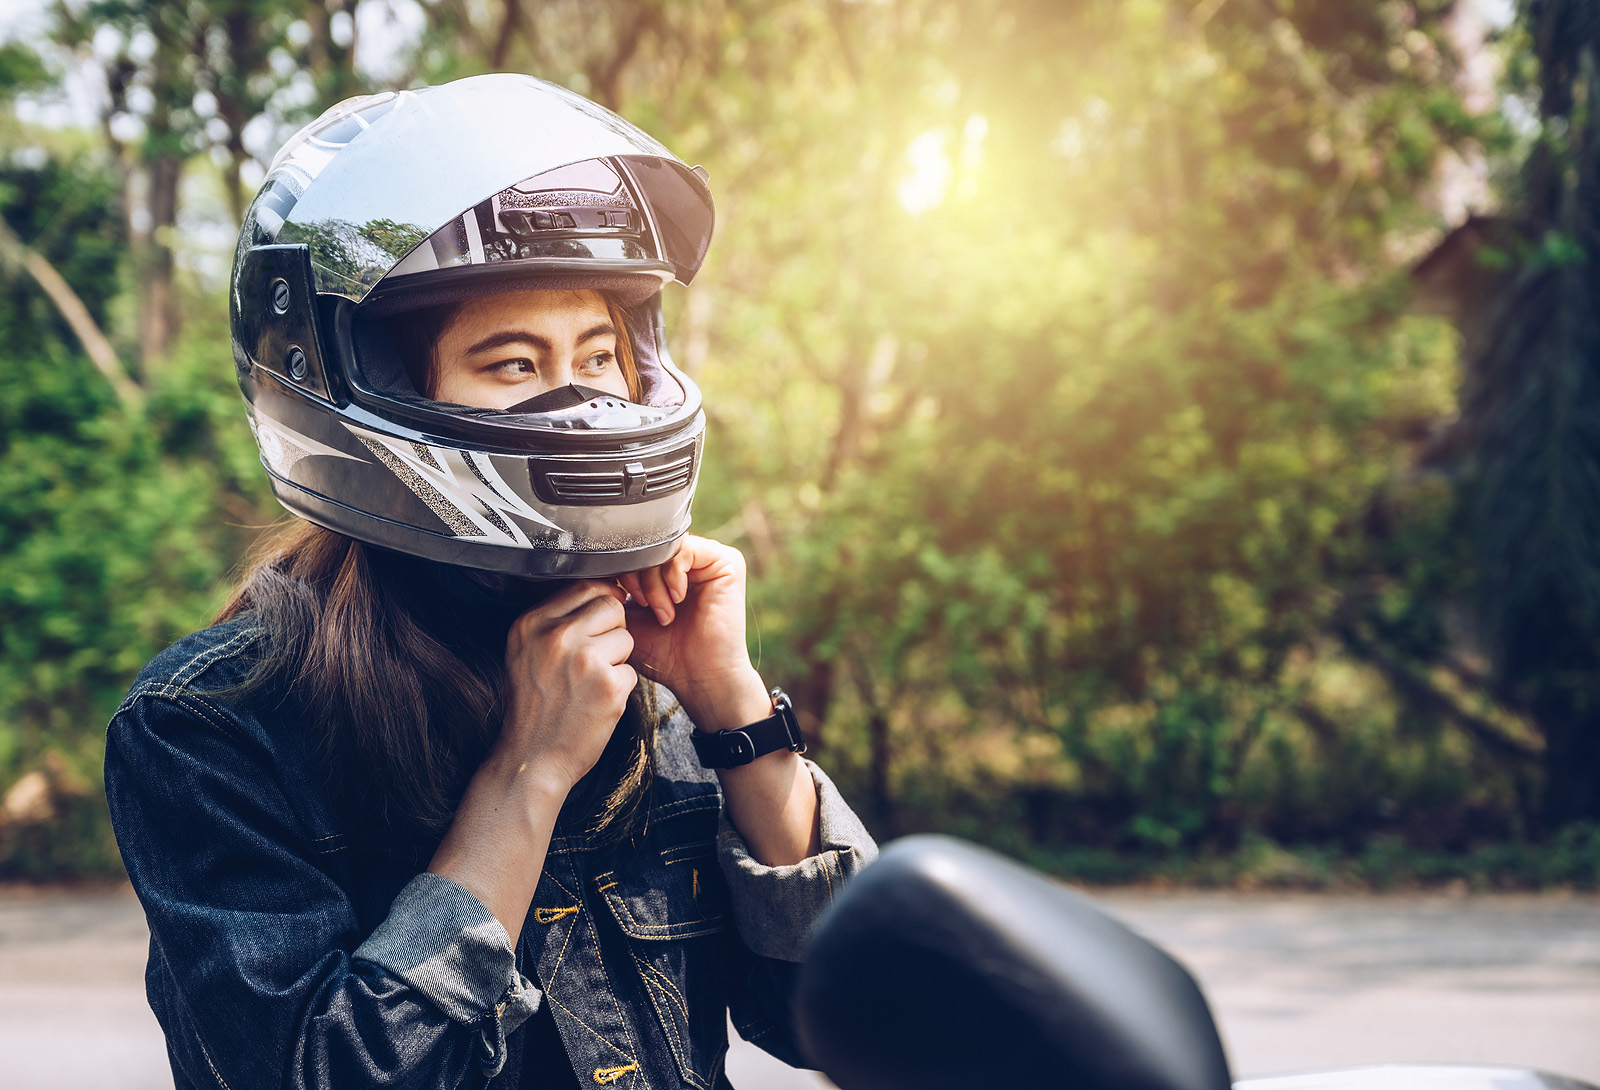 Woman About To Ride Motorcycle